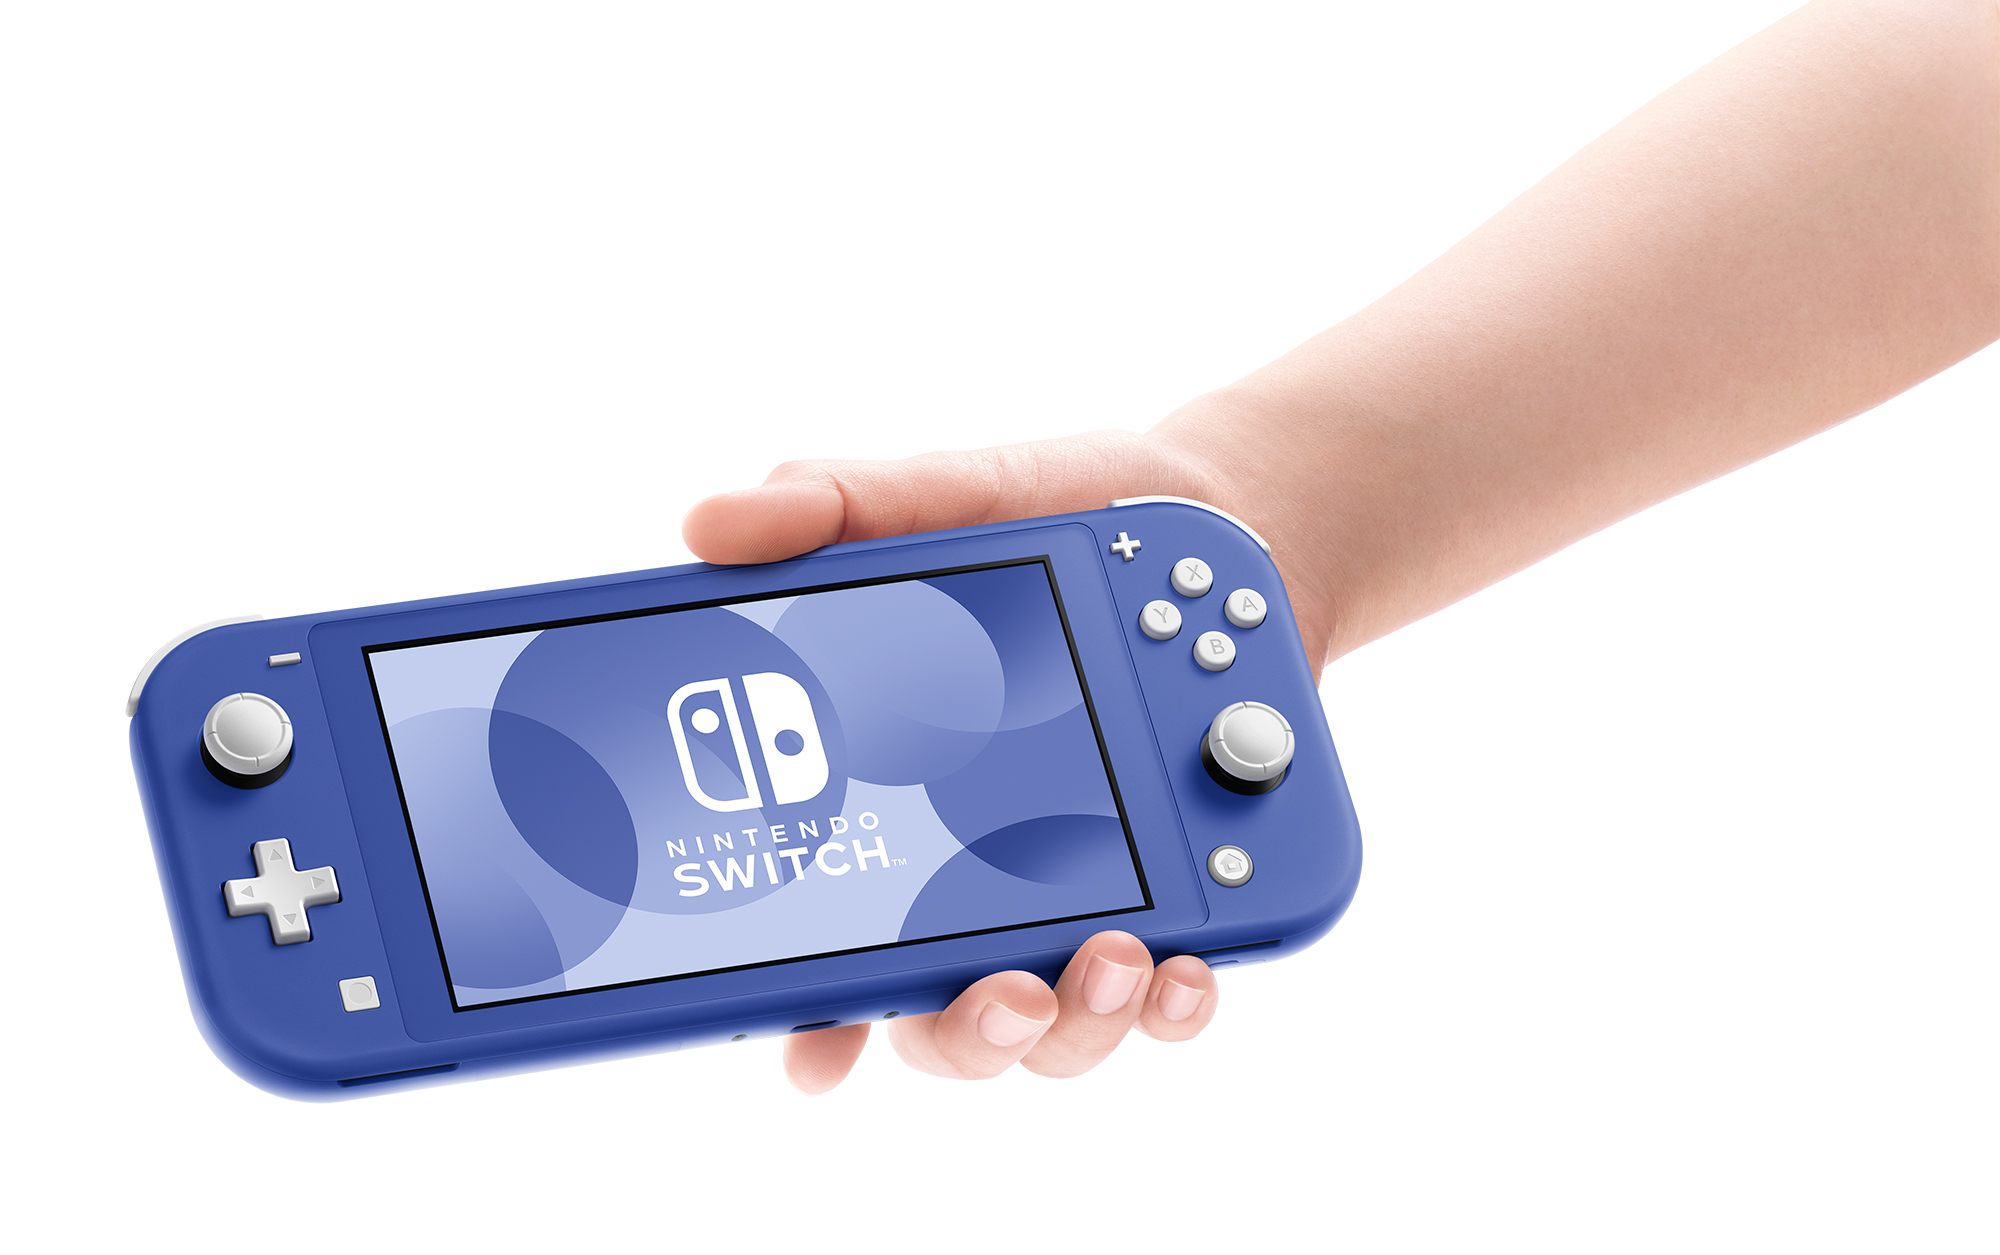 Switch Lite blue color version launches May 7 in Europe, May 21 in